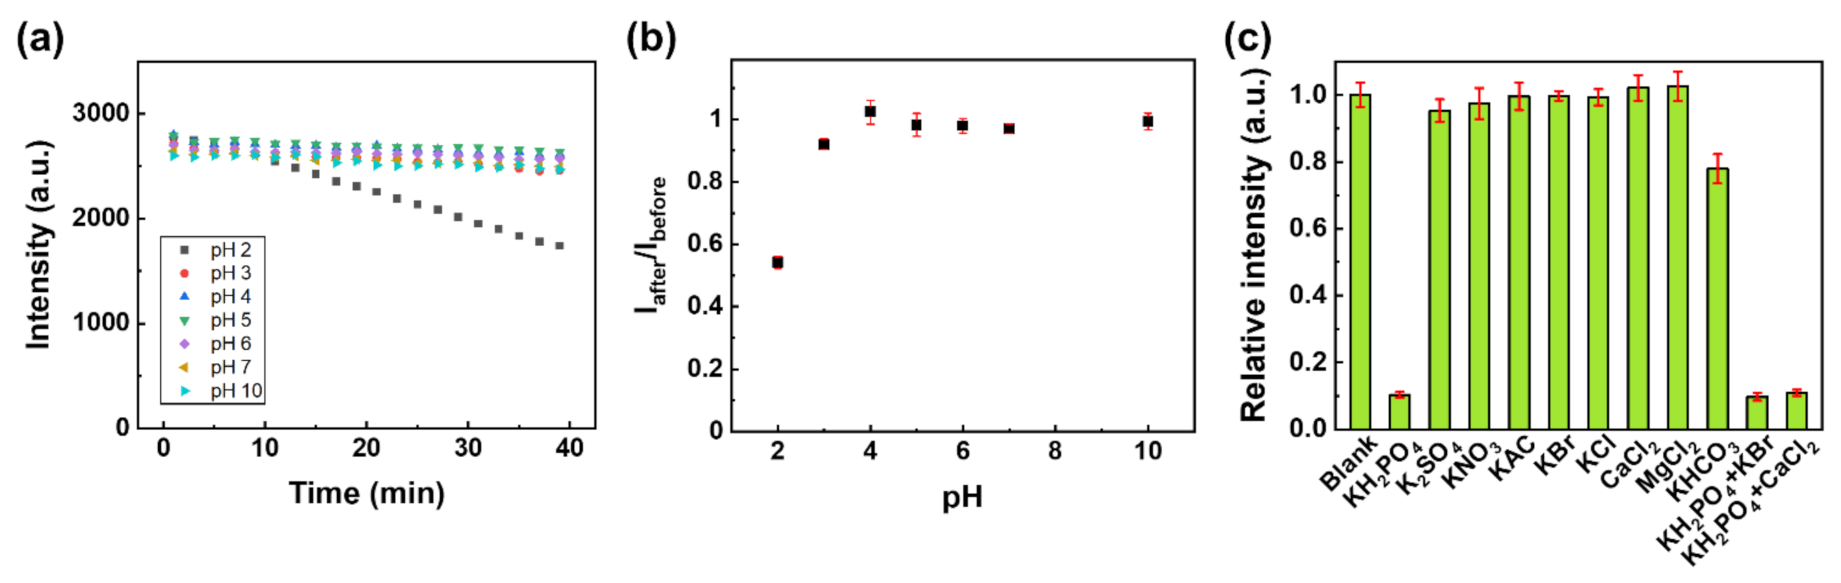 (a) The luminescence intensity of Eu-TCA/GMF as a function of time under various pH conditions. (b) Iafter/Ibefore of Eu-TCA/GMF (n = 6) as a function of pH, where Ibefore is the luminescence intensity before exposure to the pH solution and Iafter is the luminescence intensity after exposure to the pH solution. (c) The luminescence intensity of Eu-TCA/GMF (n = 6) immersed in phosphate and other various ionic solutions (1 mM).